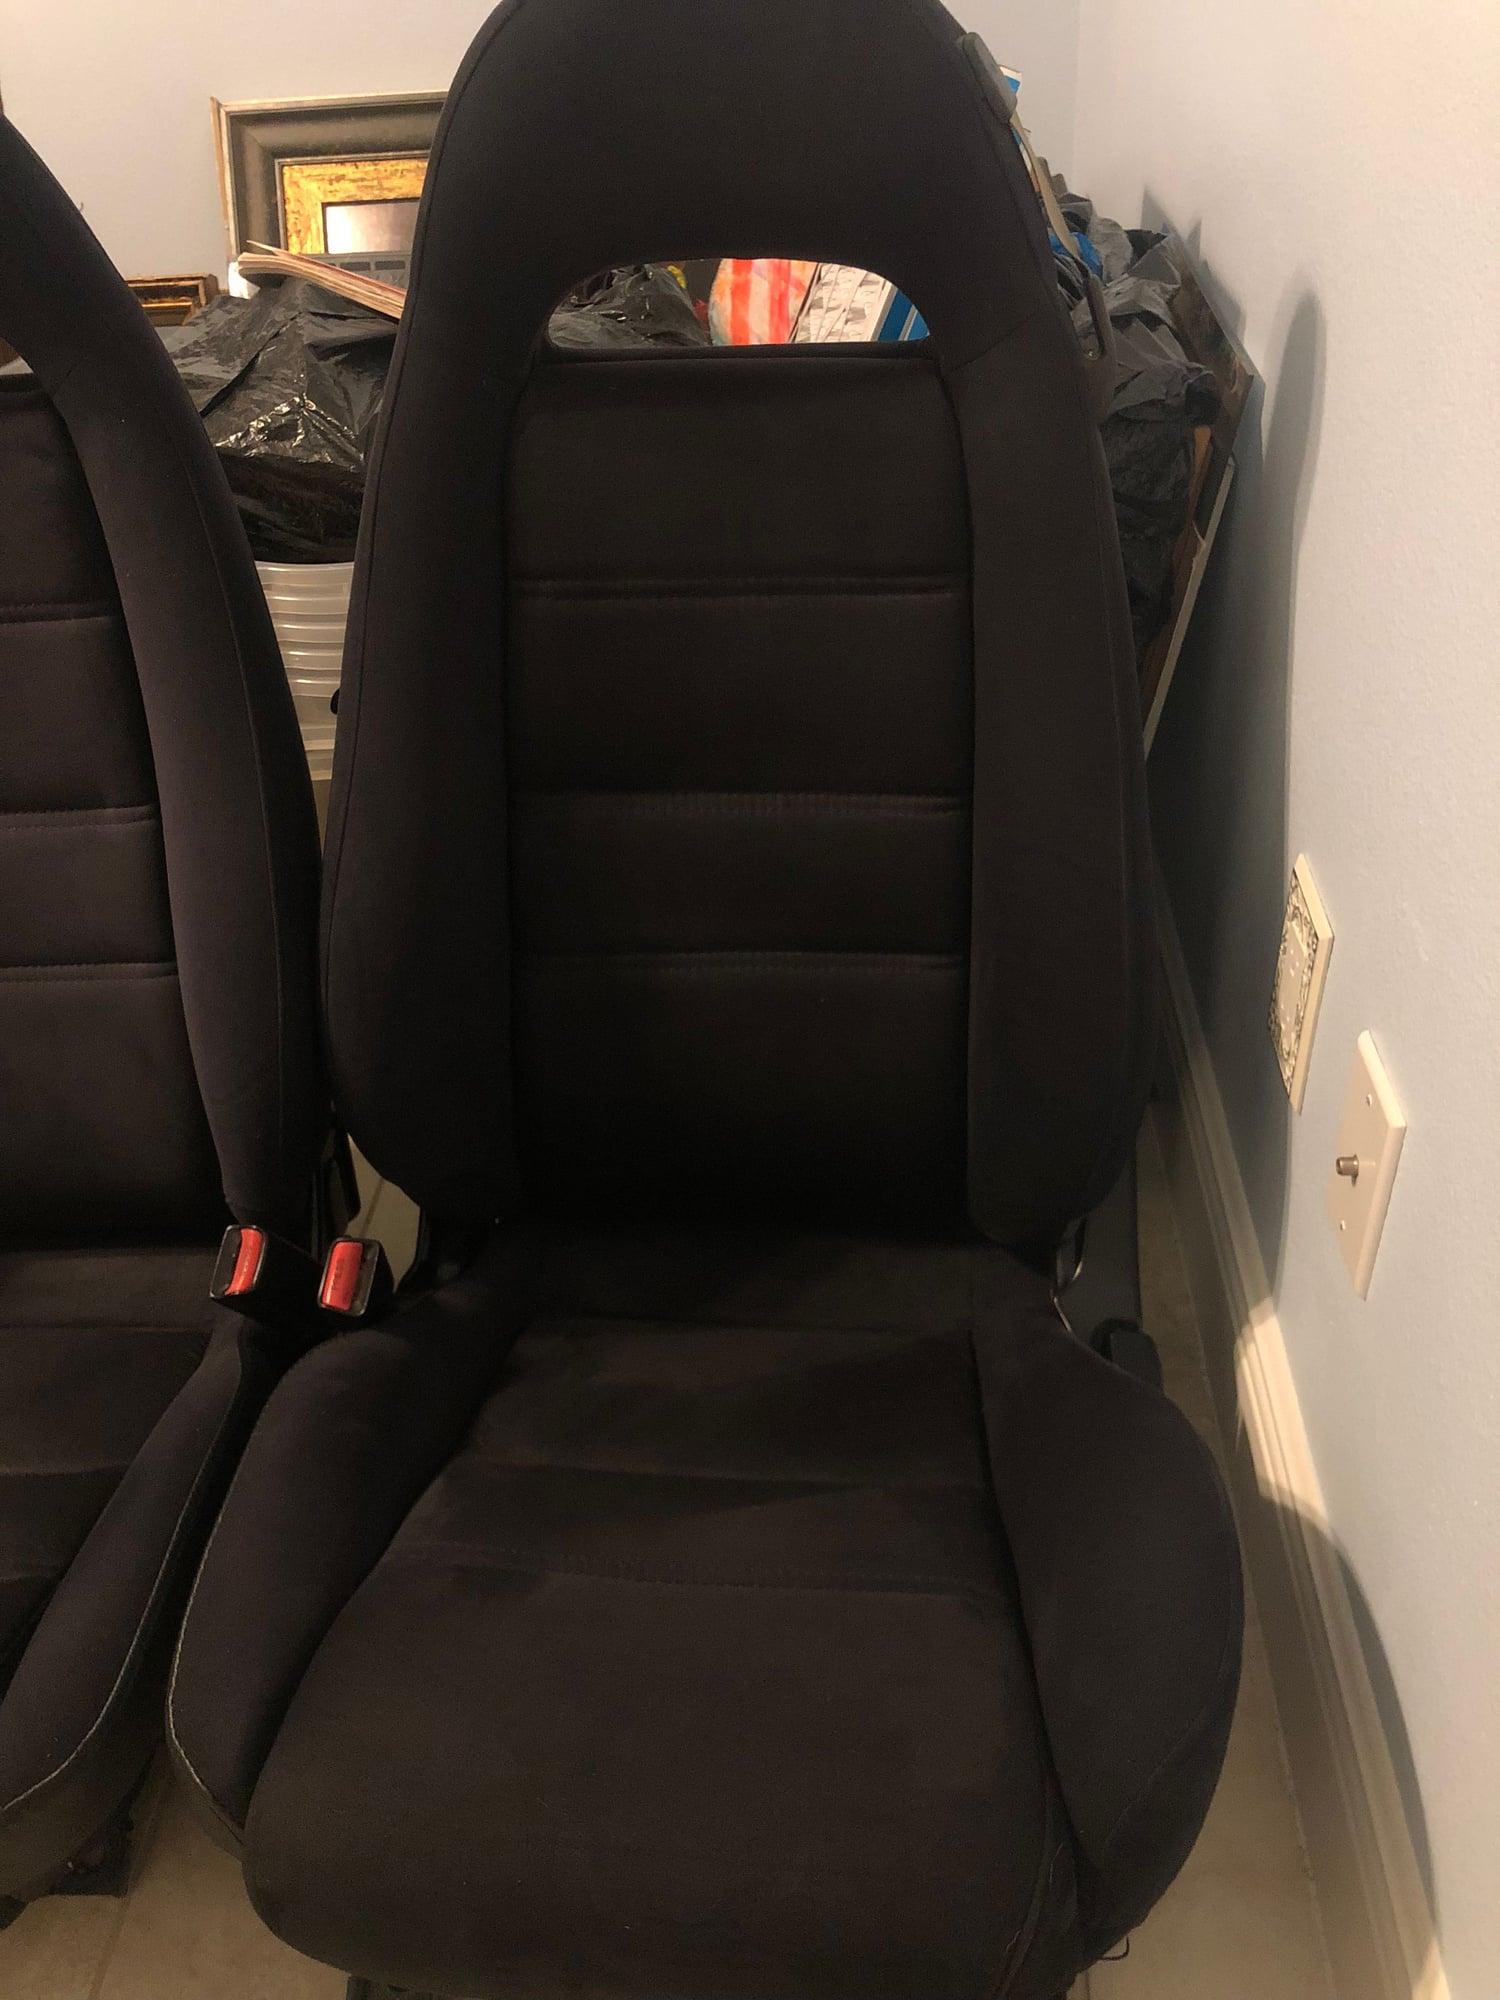 Interior/Upholstery - FL FD Suede R1 seats - Used - 0  All Models - Stuart, FL 34994, United States